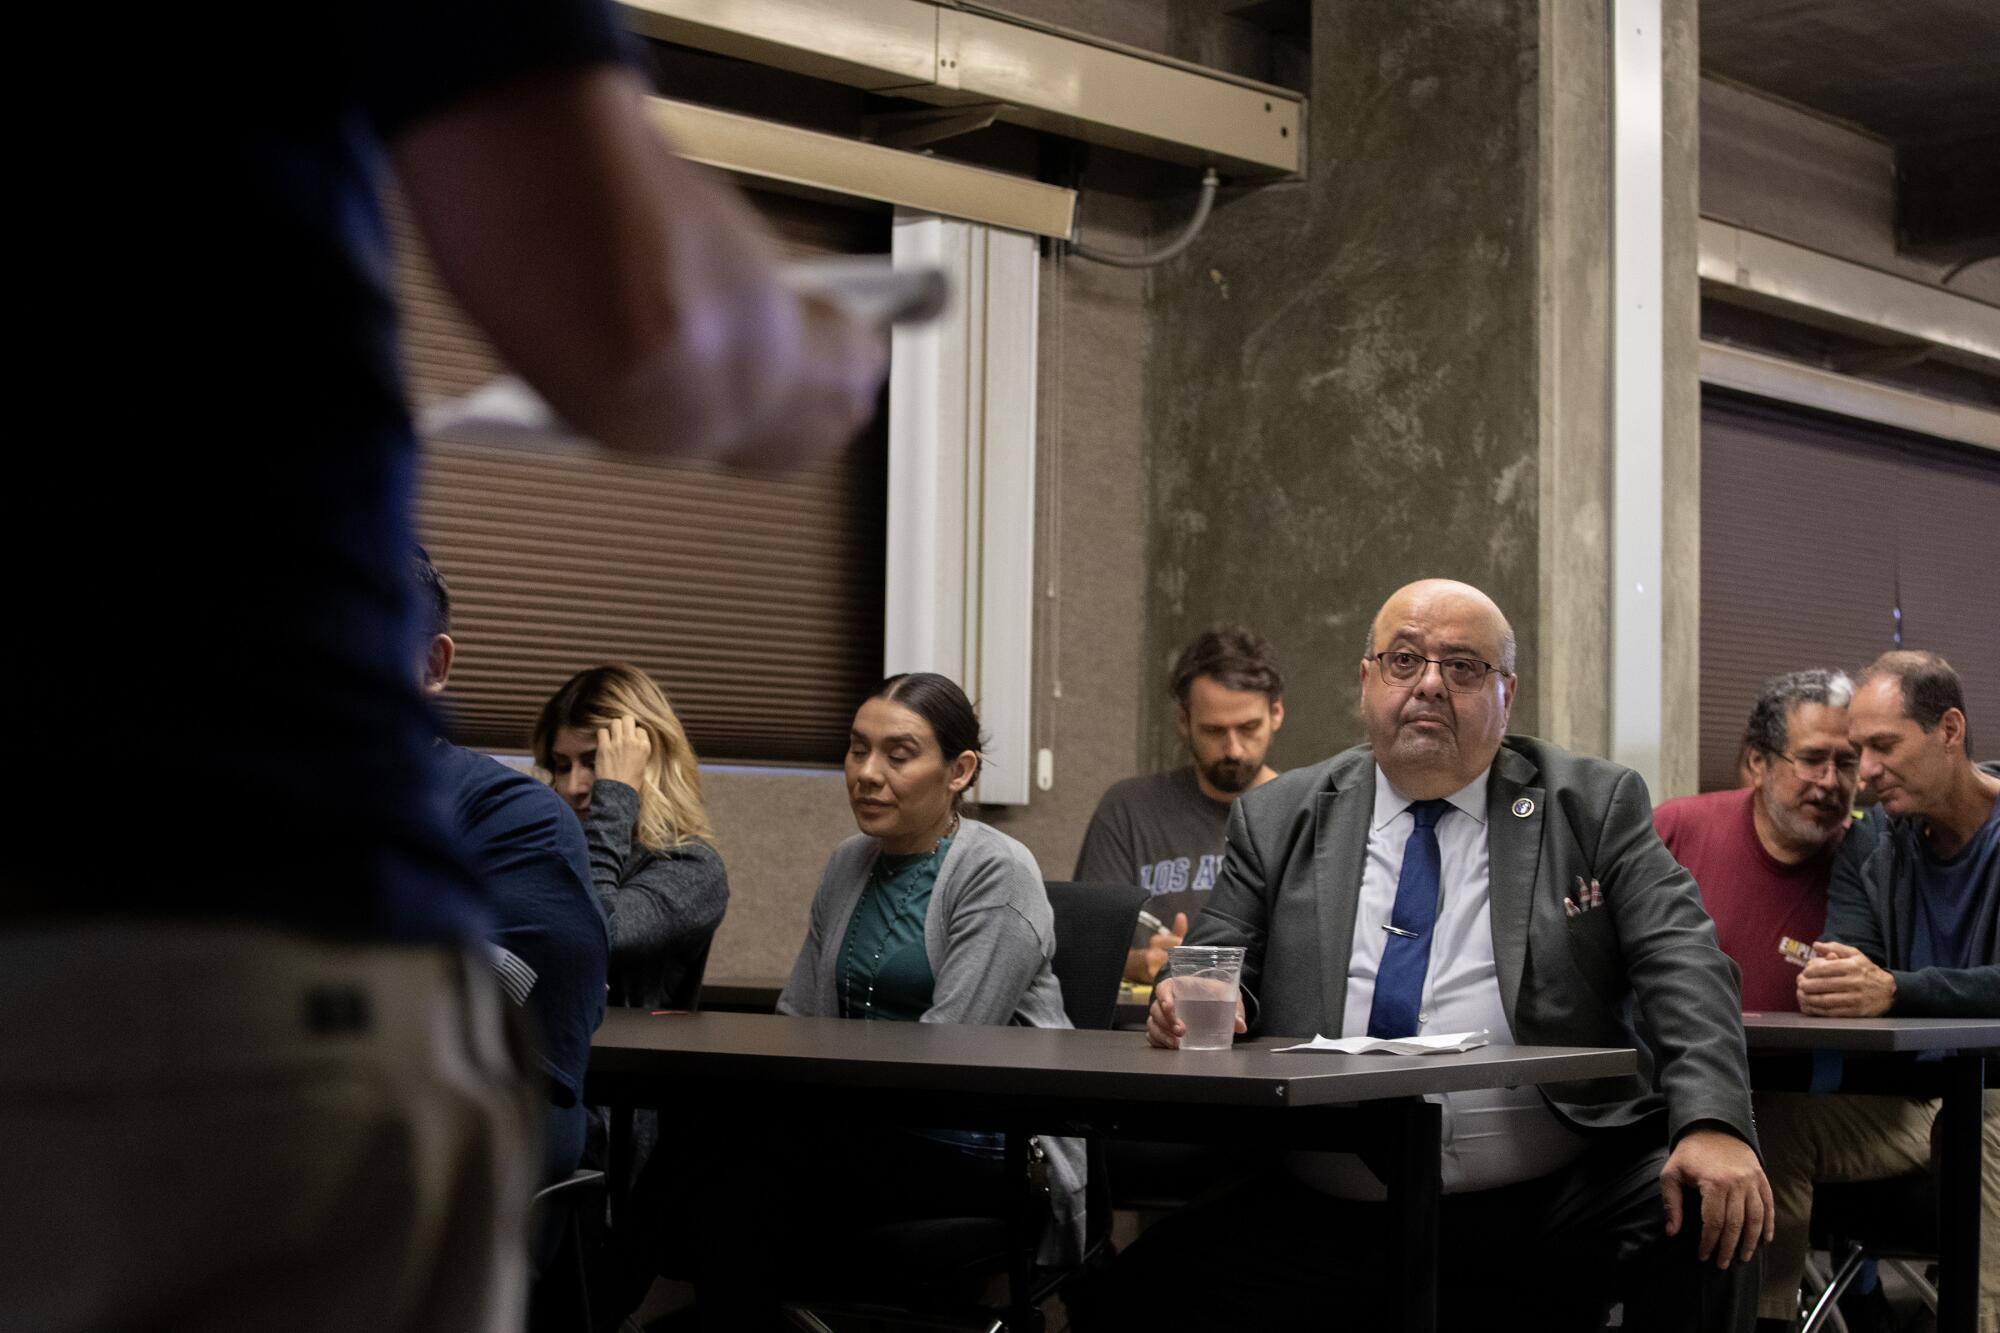 Adel Hagekhalil listens during a meeting at the Diemer Water Treatment Plant.